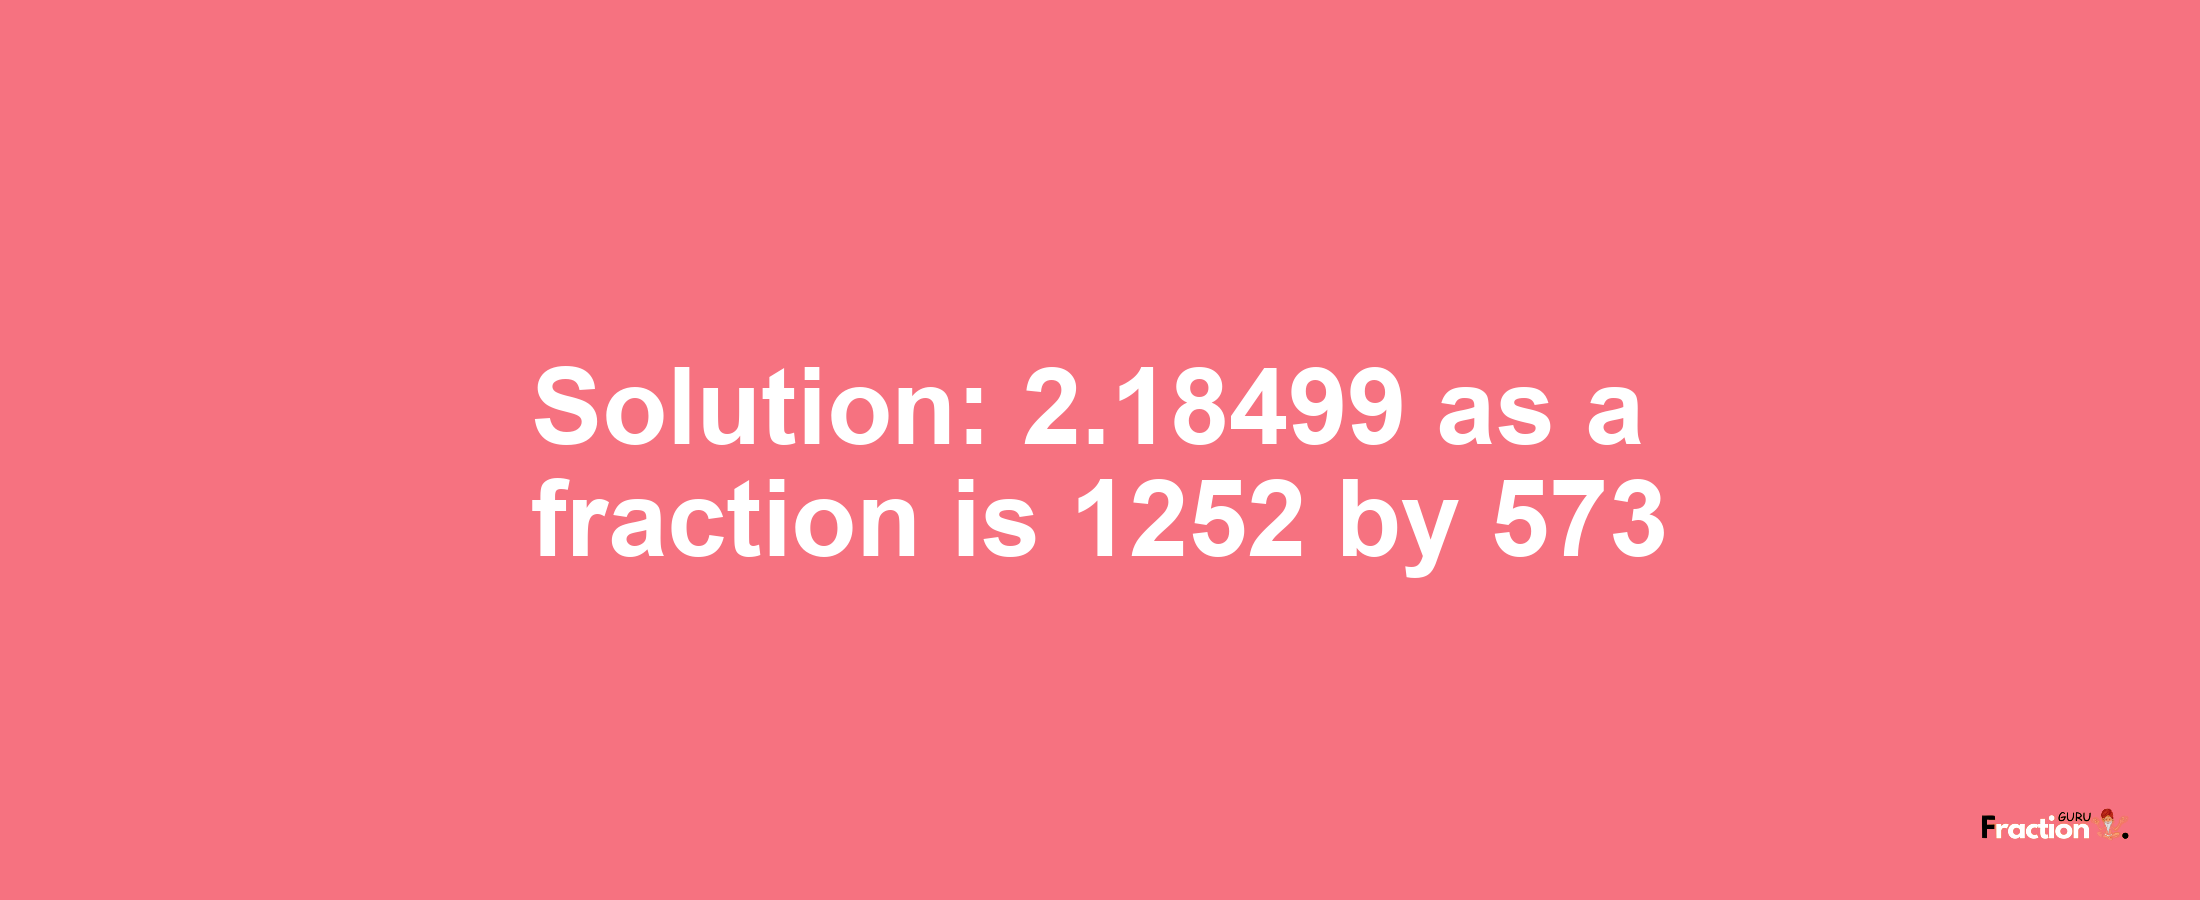 Solution:2.18499 as a fraction is 1252/573